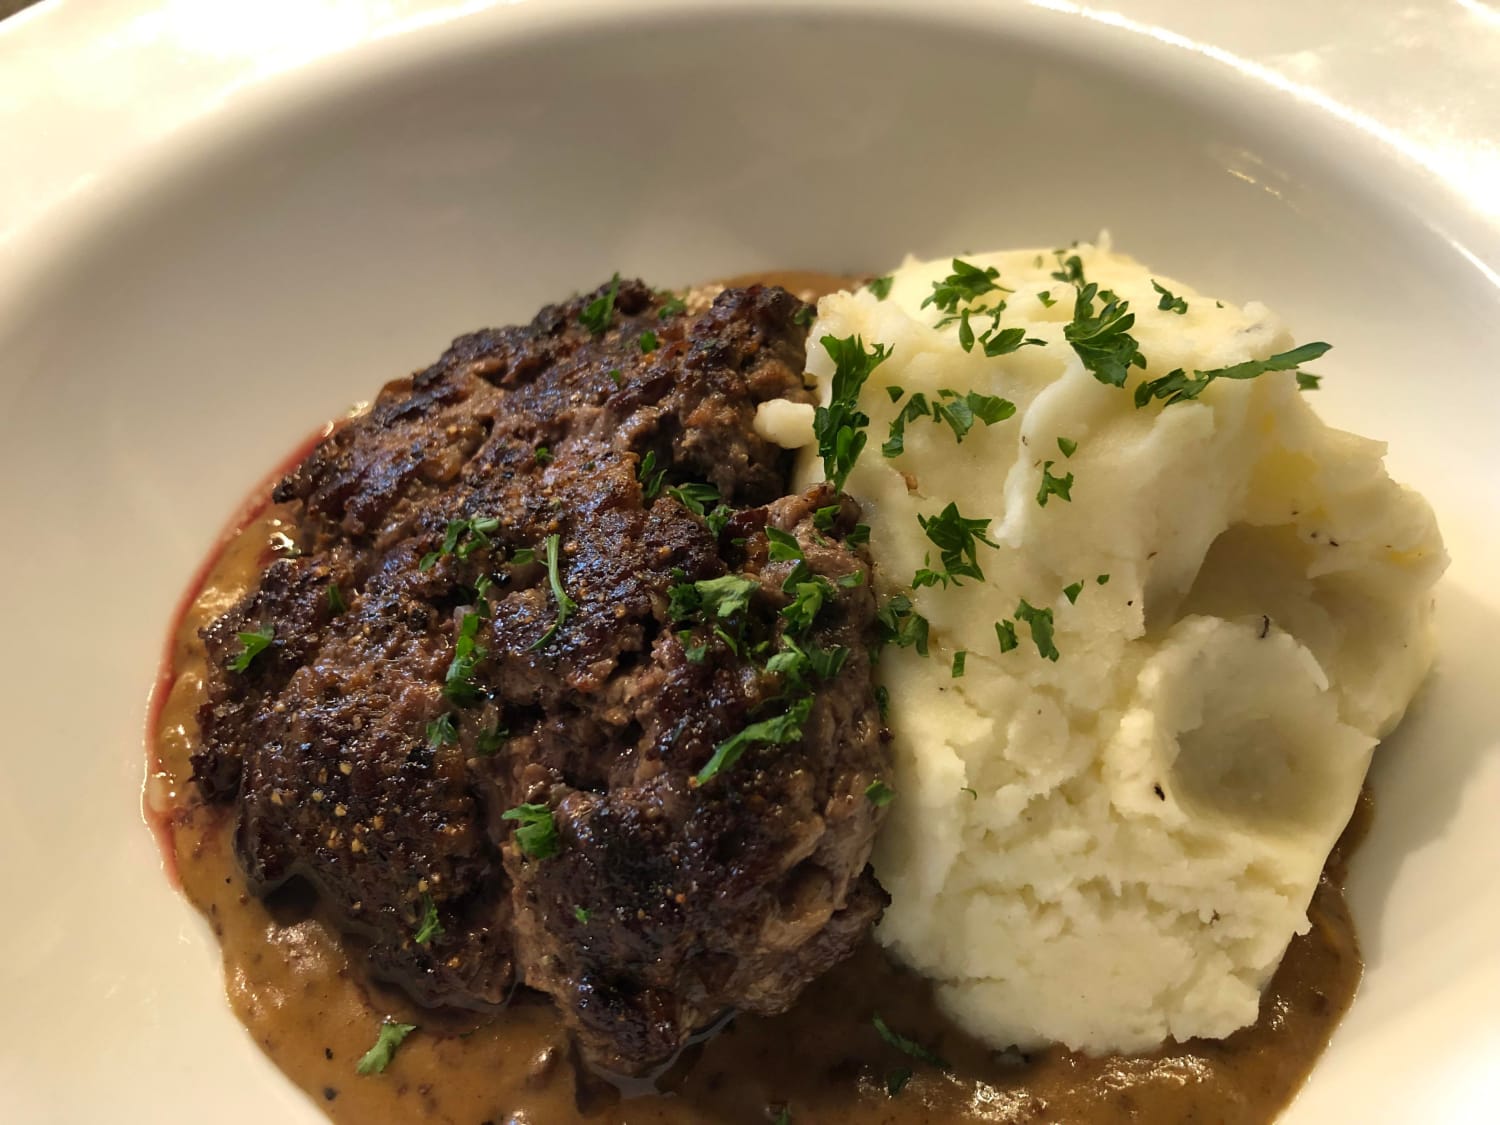 My wife requested Salisbury steak, mashed potatoes and gravy for dinner. So I made her a ground rib eye / short rib Salisbury steak with garlic mash and chunky beef gravy. Happy Mother’s Day, Moms!